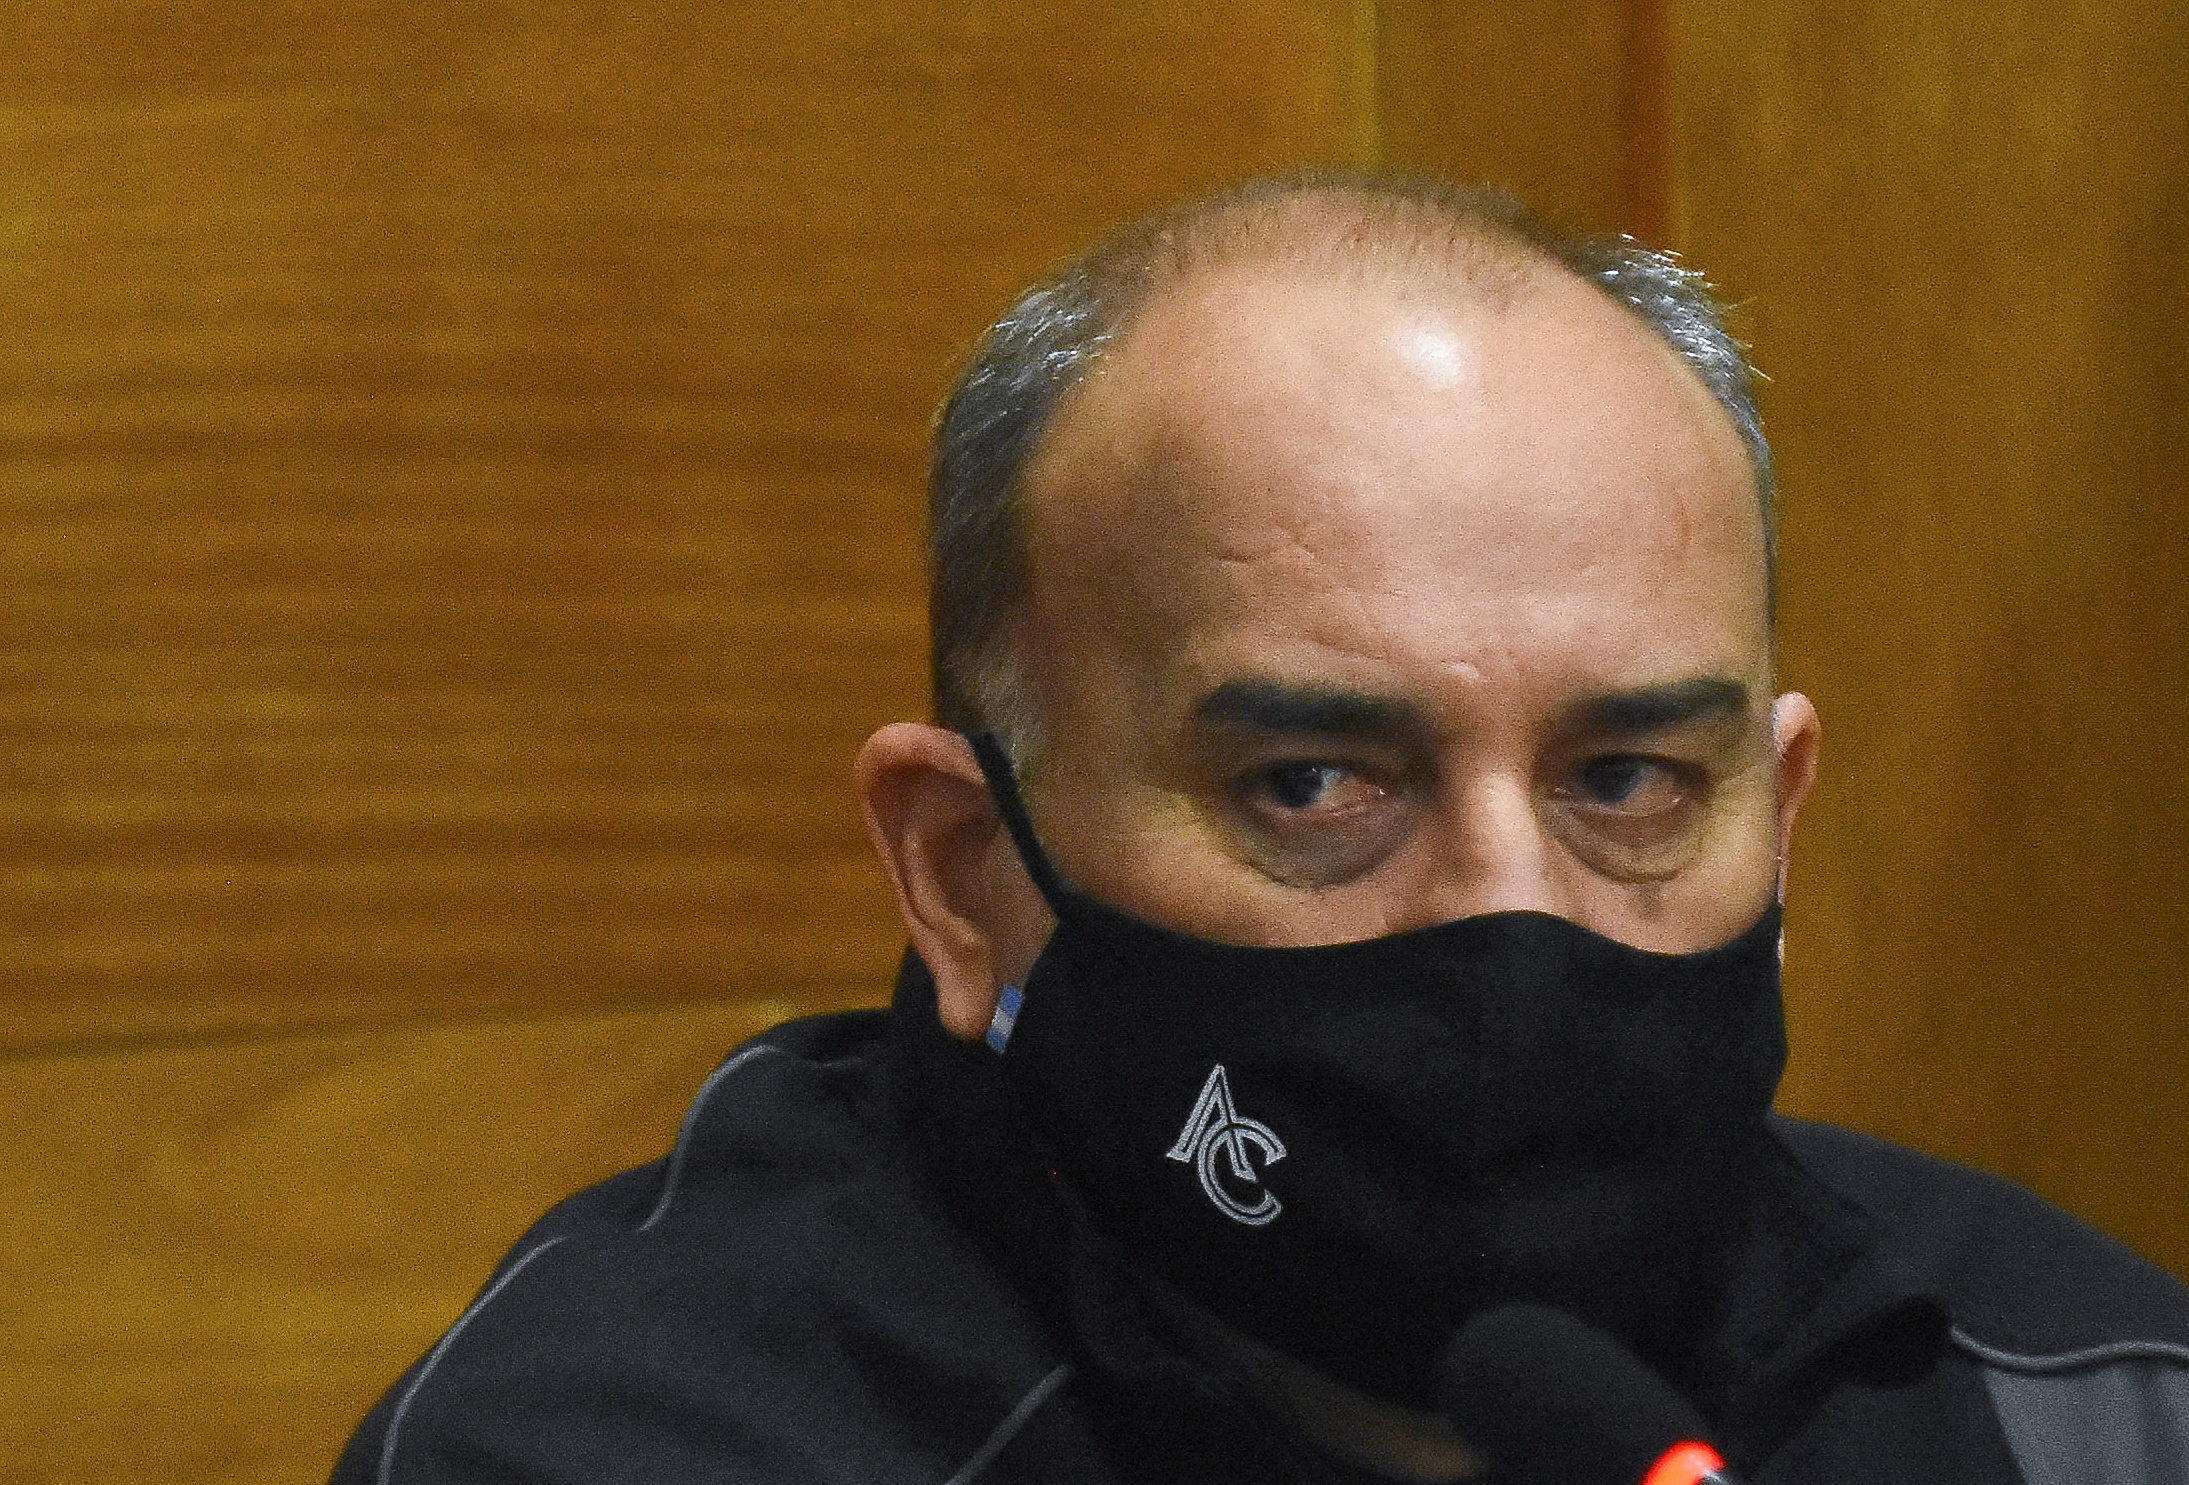 Argentine golfer Angel Cabrera is pictured before a hearing as part of his trial on charges of domestic violence, in Cordoba, Argentina July 7, 2021. REUTERS/Charly Soto